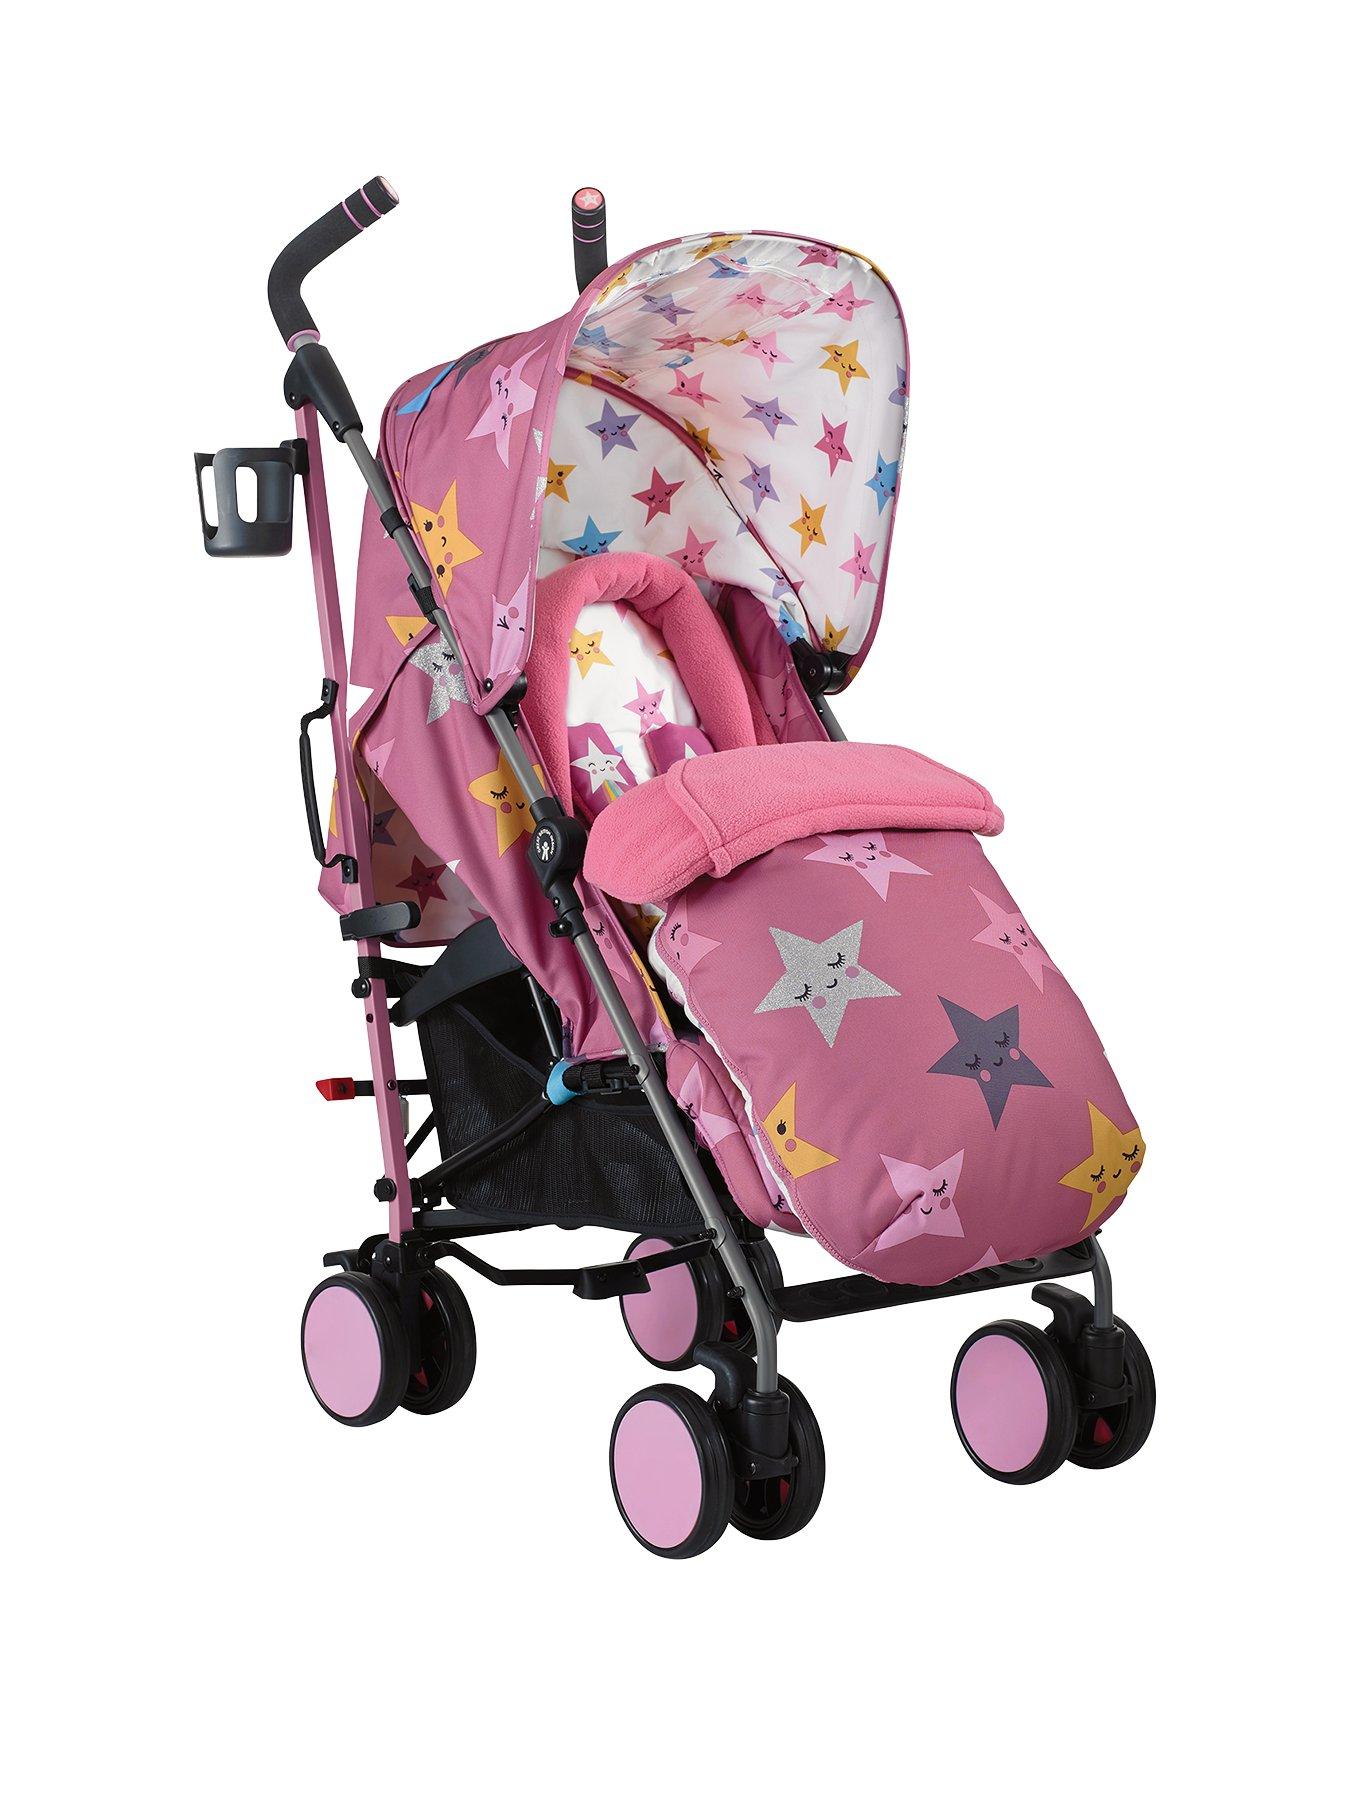 Easy Fold Pushchairs Child Baby Www Littlewoodsireland Ie - roblox bunny ears of caprice code